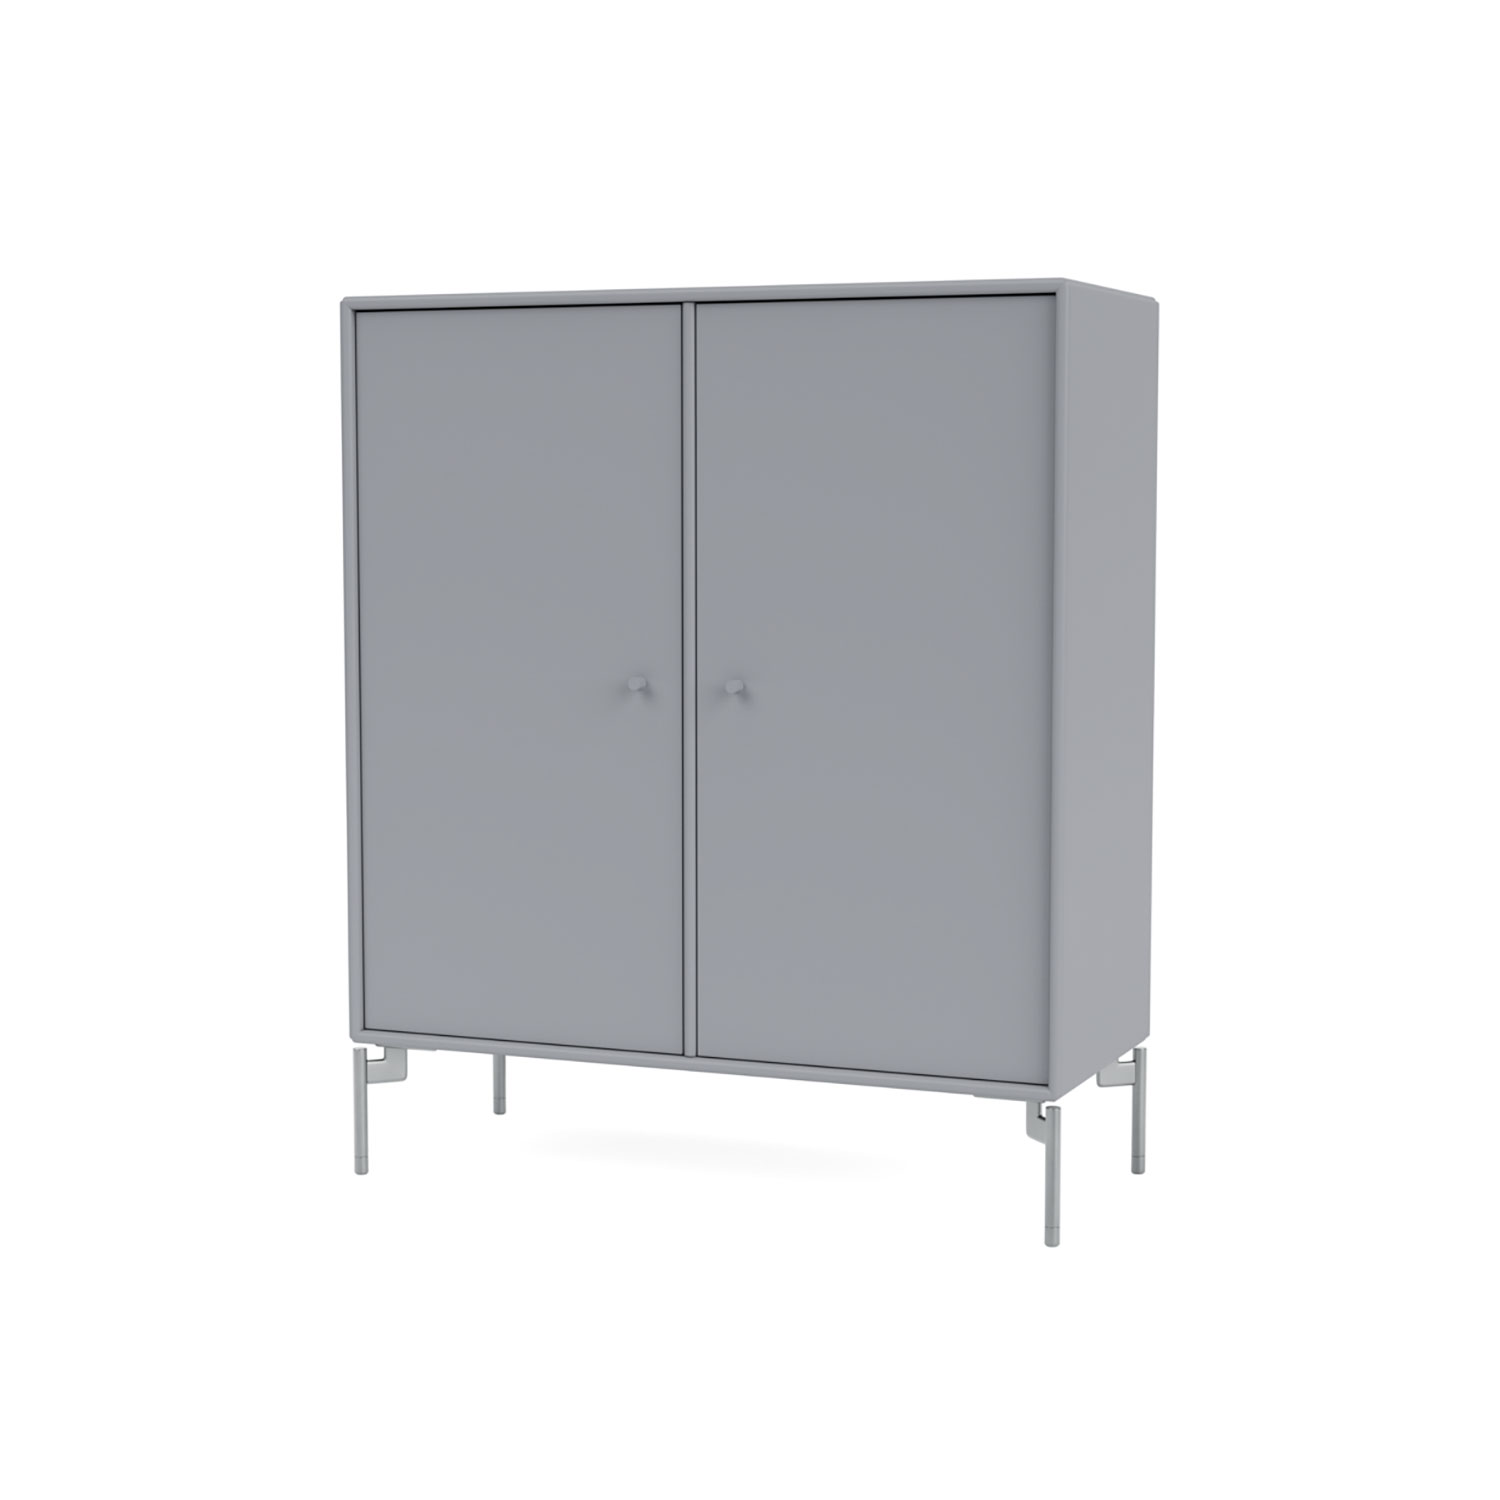 COVER Cabinet 1118, Graphic